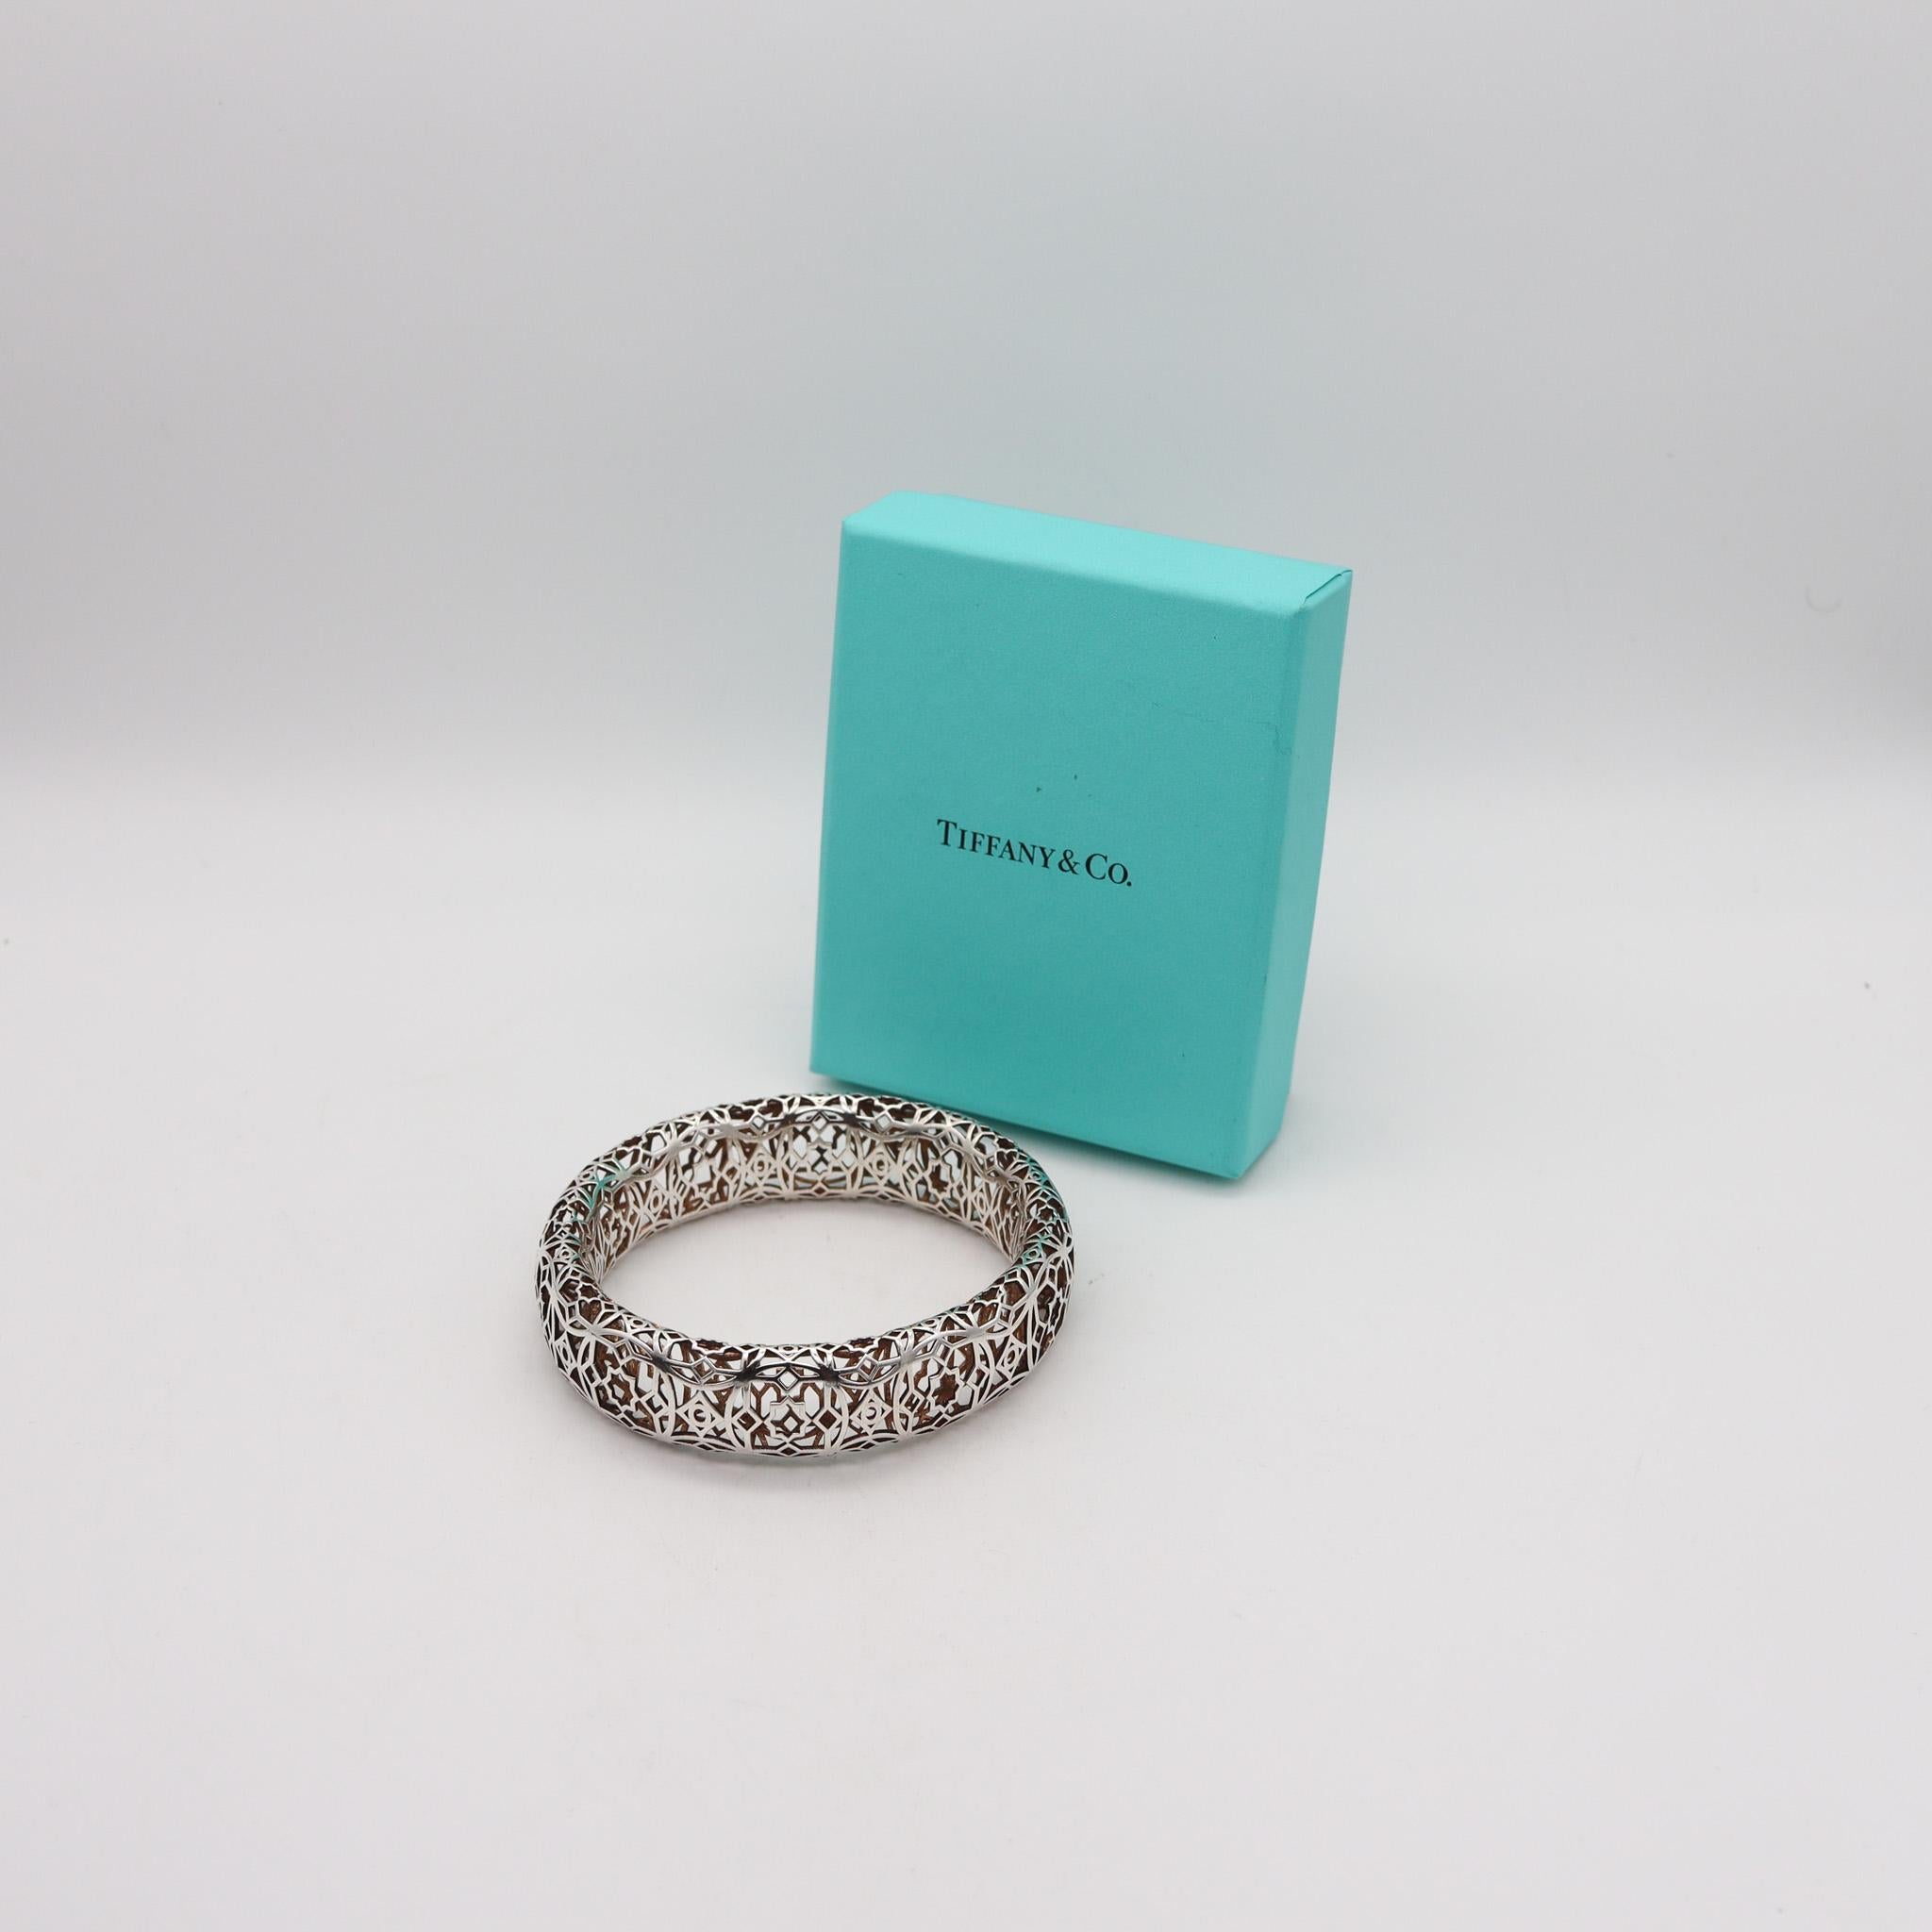 Modernist Tiffany & Co. Paloma Picasso Marrakesh Bangle Bracelet In .925 Sterling Silver For Sale